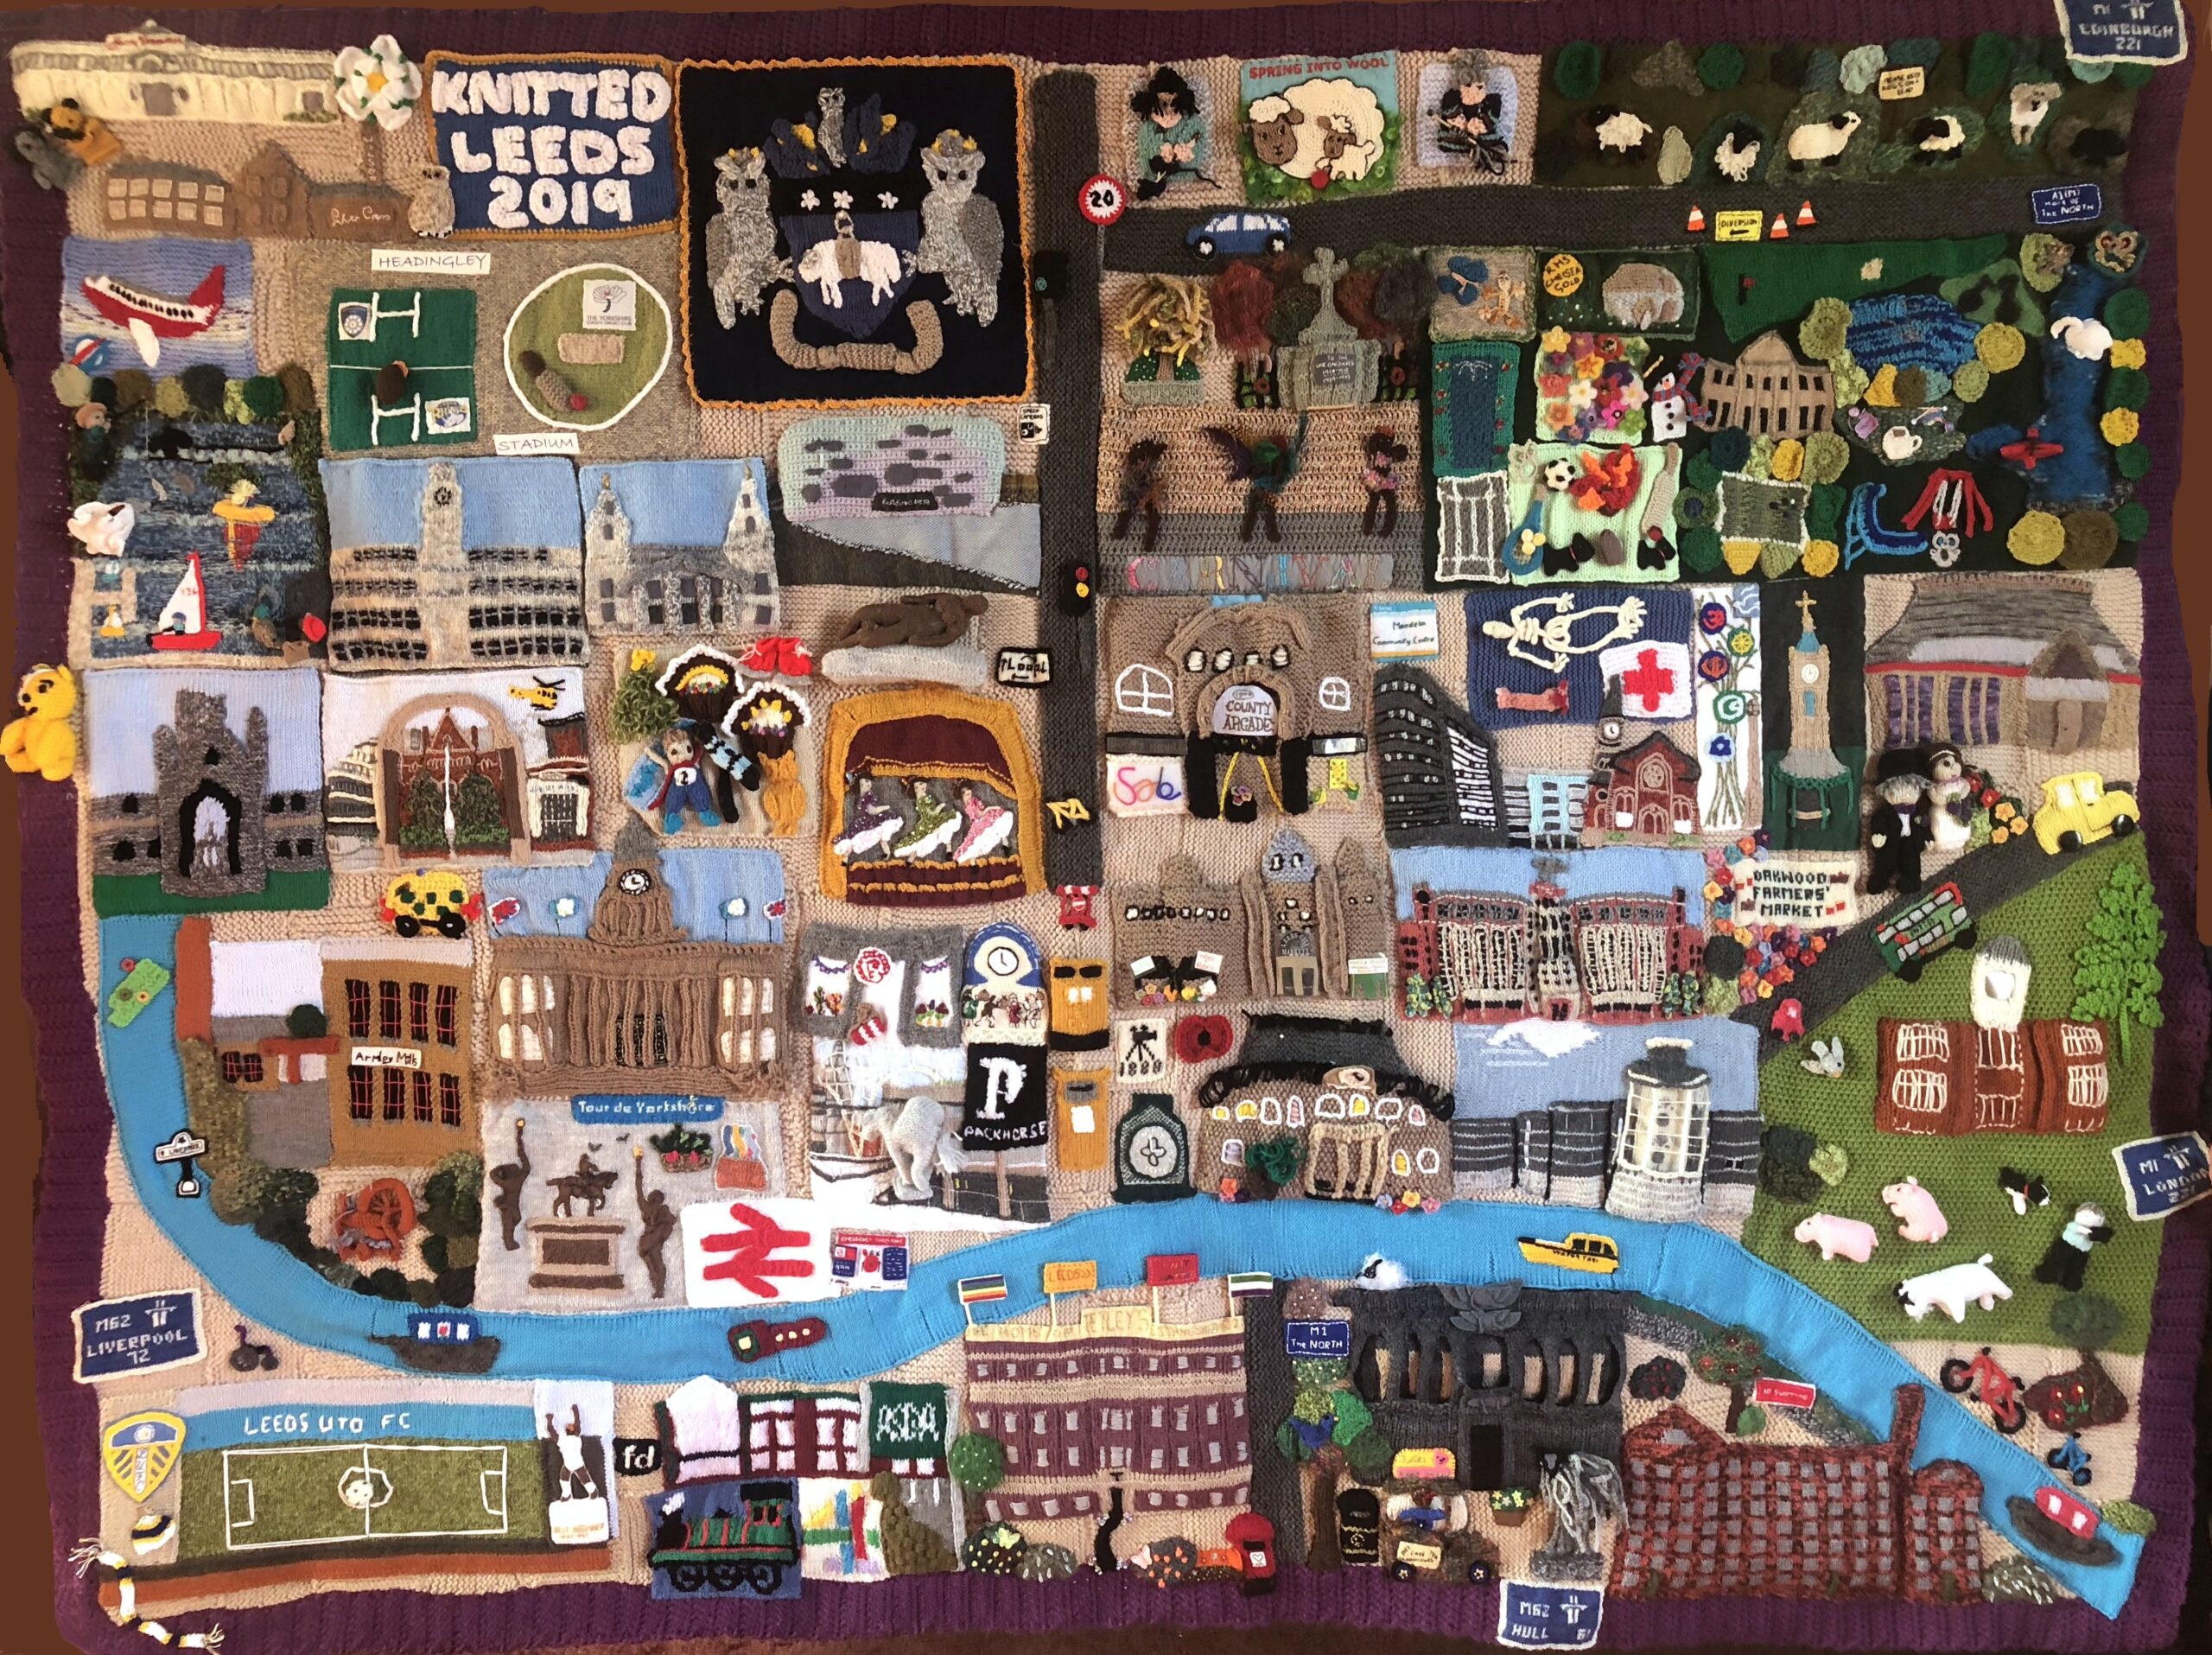 Knitted representation of Leeds. Knitted landmarks are placed in their approximate positions in the city.